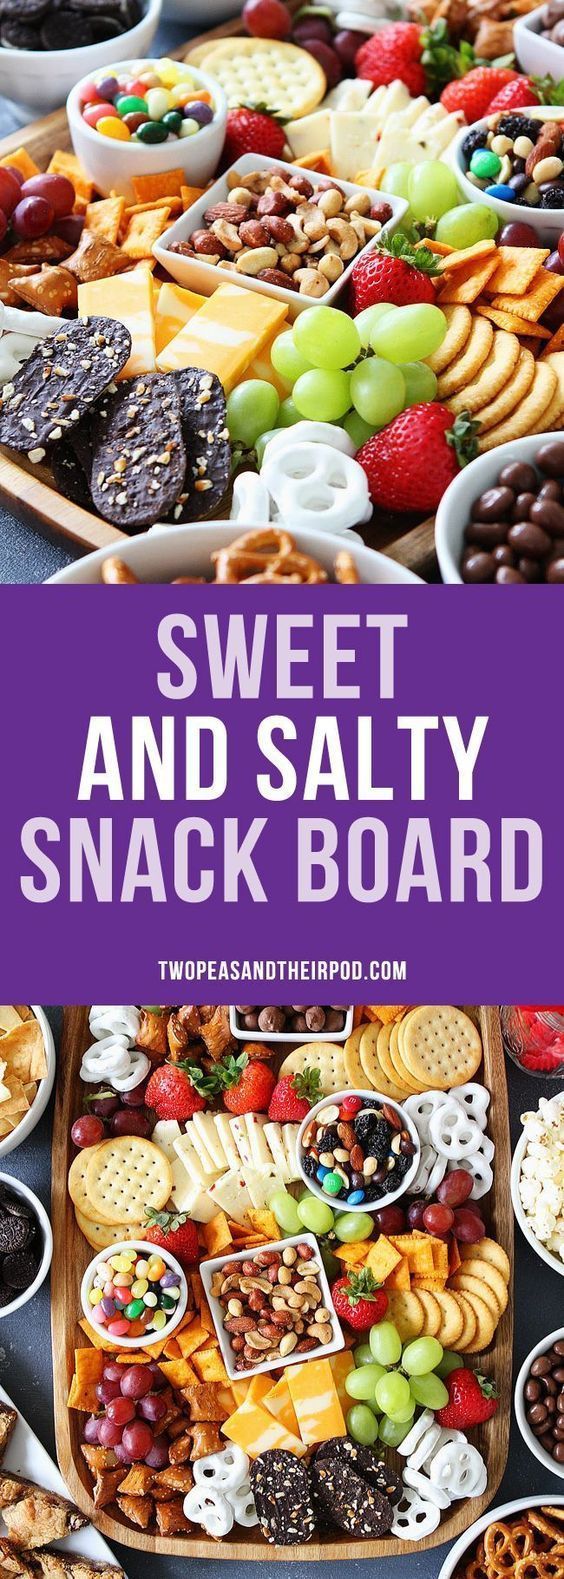 Sweet and Salty Snack Board -   17 desserts For Parties entertaining ideas